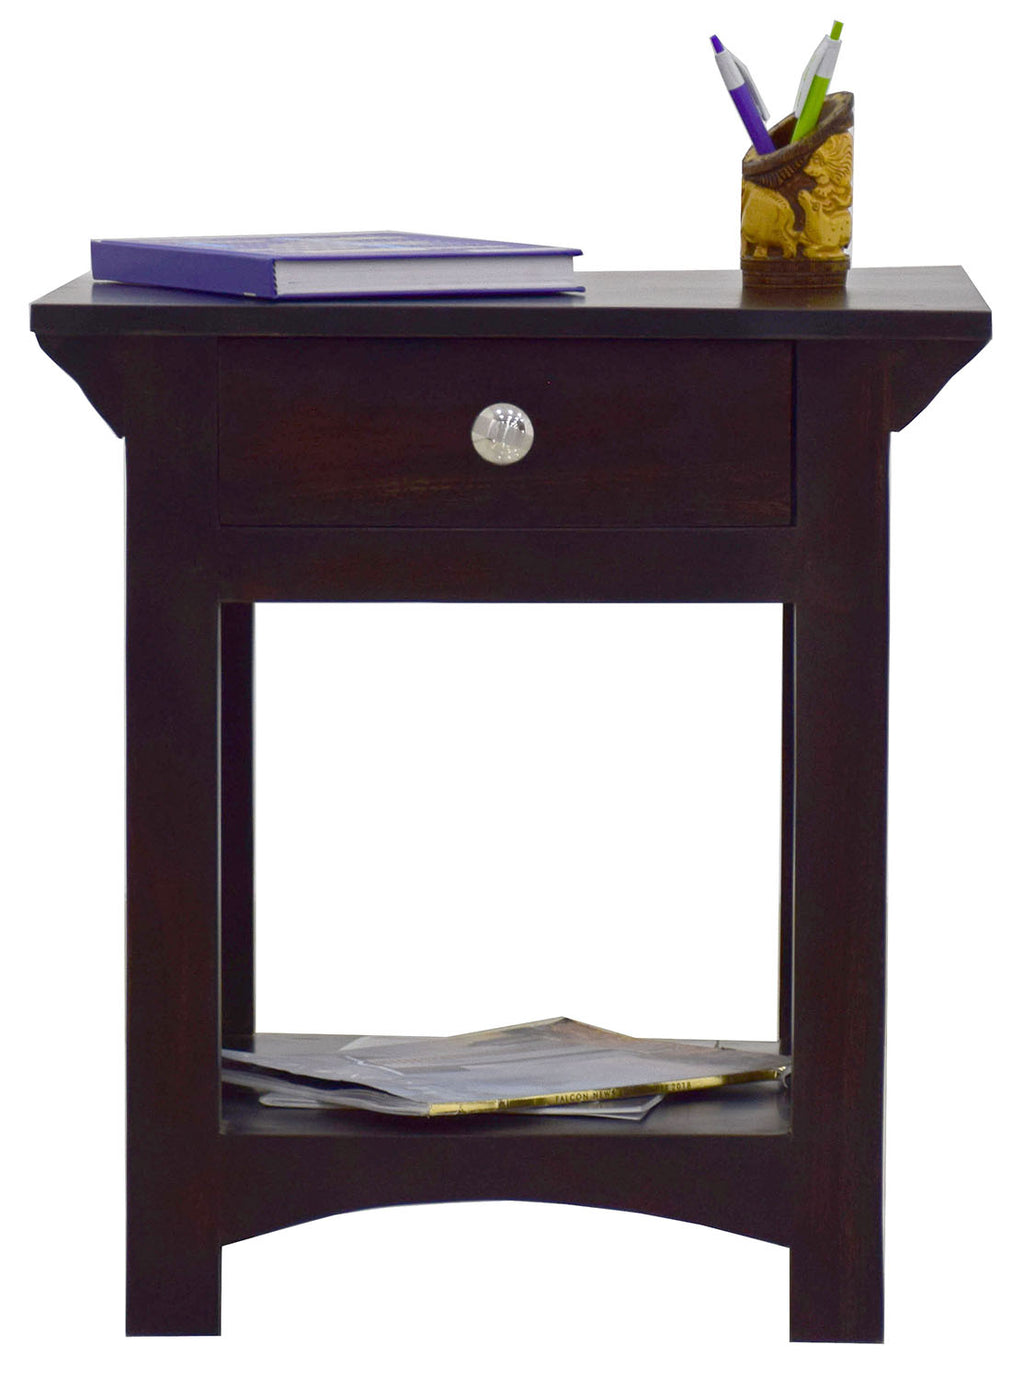 TimberTaste COOPER Solid Wood End Table in Natural Teek And Dark Walnut Finish, corner table, end table, accent table, solid wood table, telephone table, fish tank stand, wooden table, sofa table, bedside table,Teek Finish.